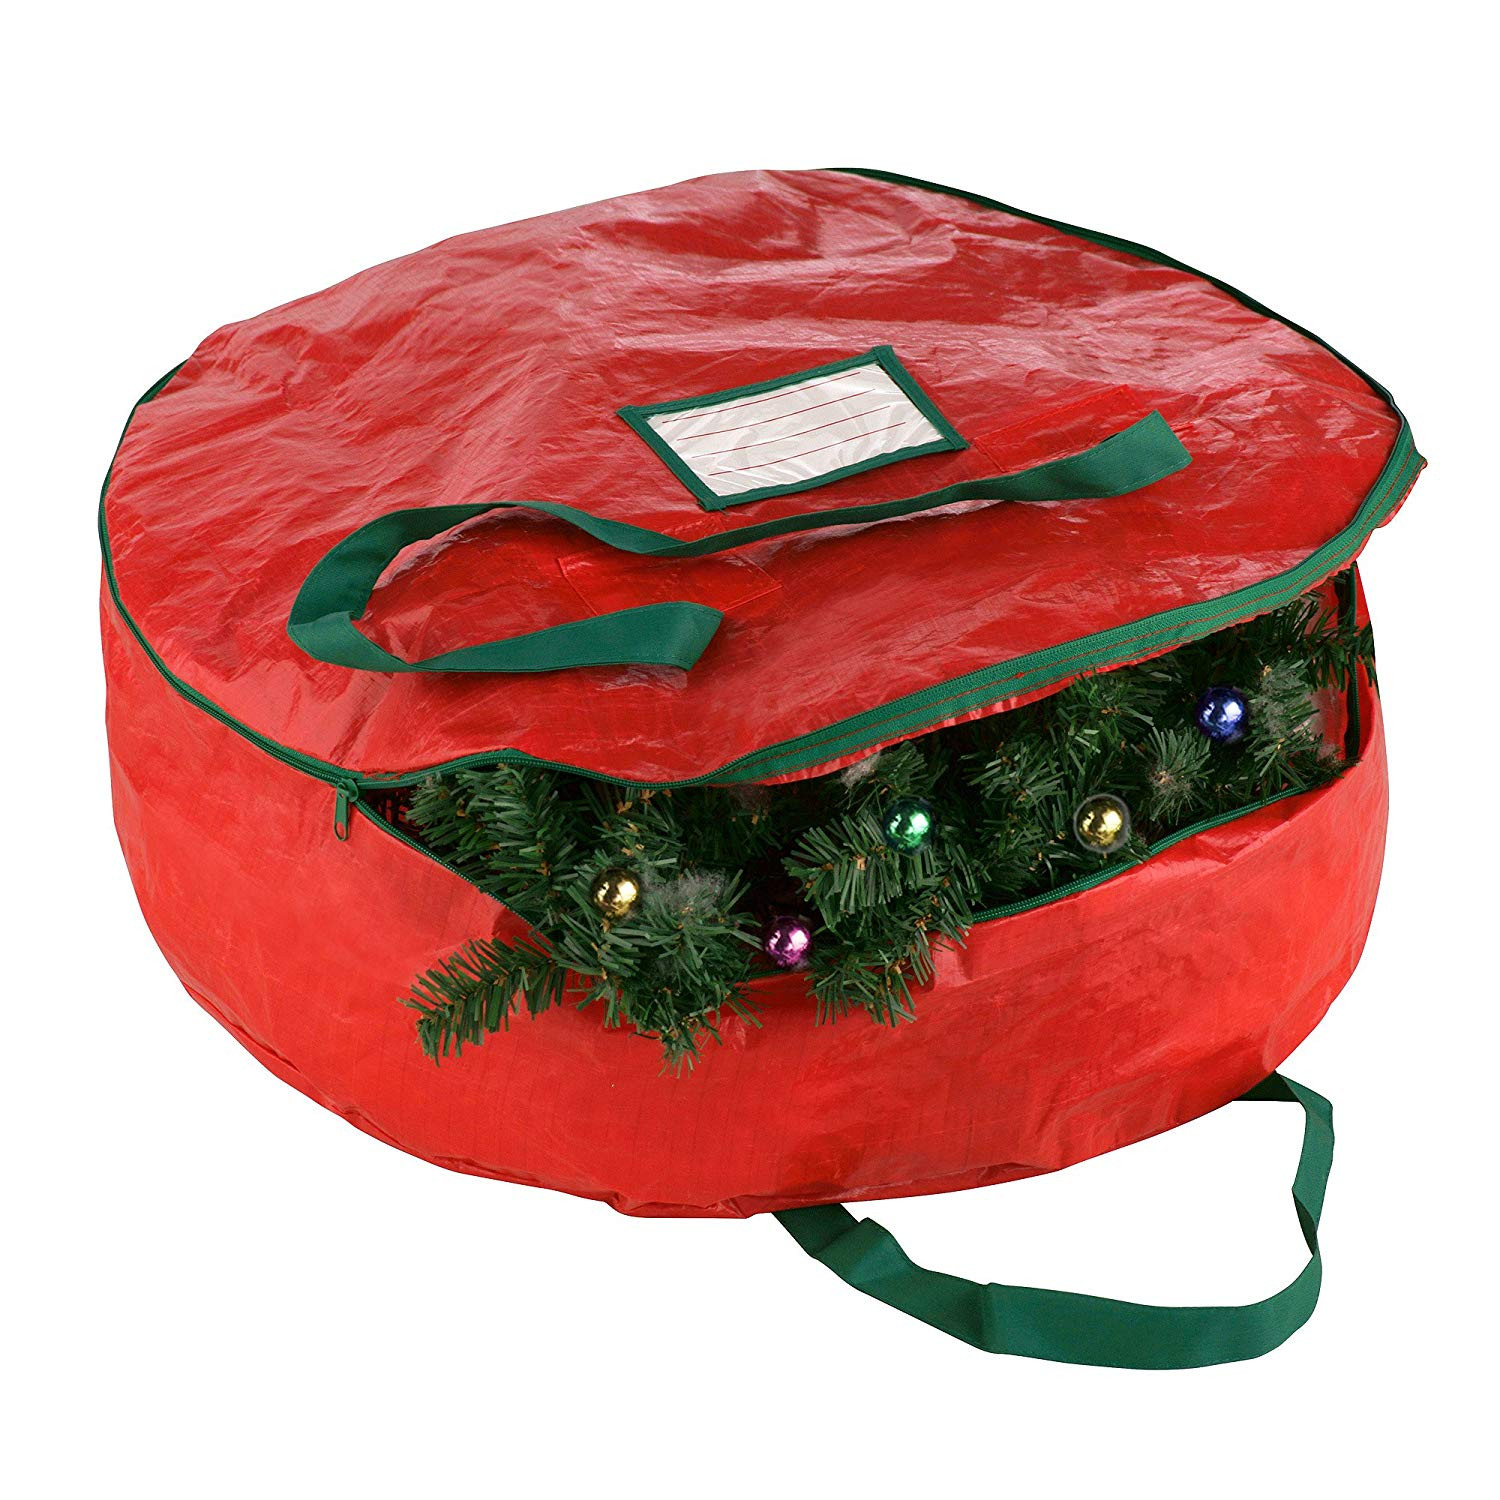 Christmas Wreath Storage
 Christmas Wreath Storage Bag Red Holiday 24" Wreaths Home